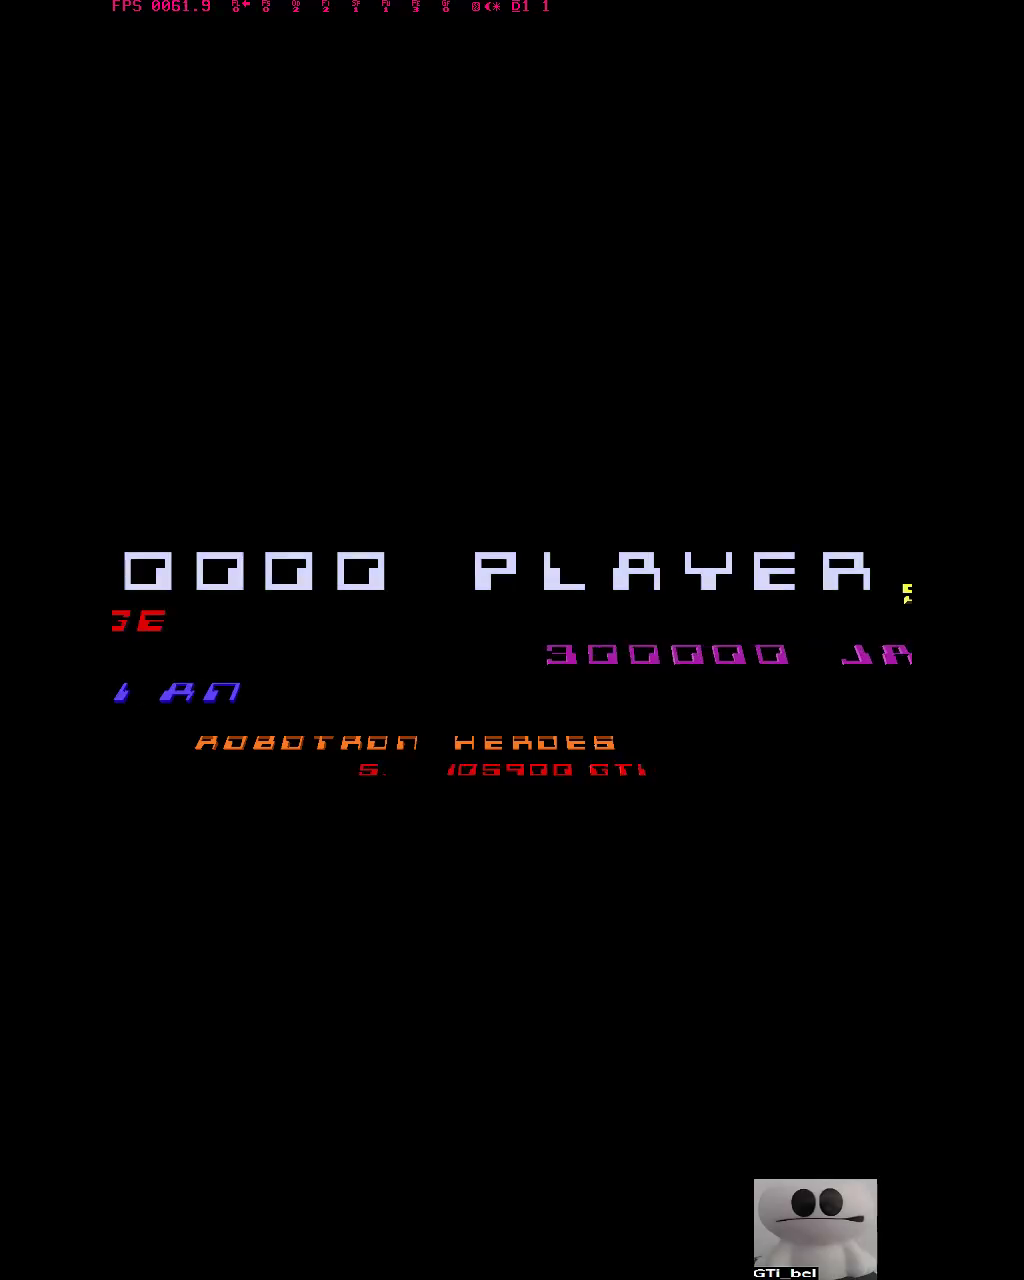 GTibel: Robotron X (Playstation 1 Emulated) 105,900 points on 2019-05-10 05:30:18